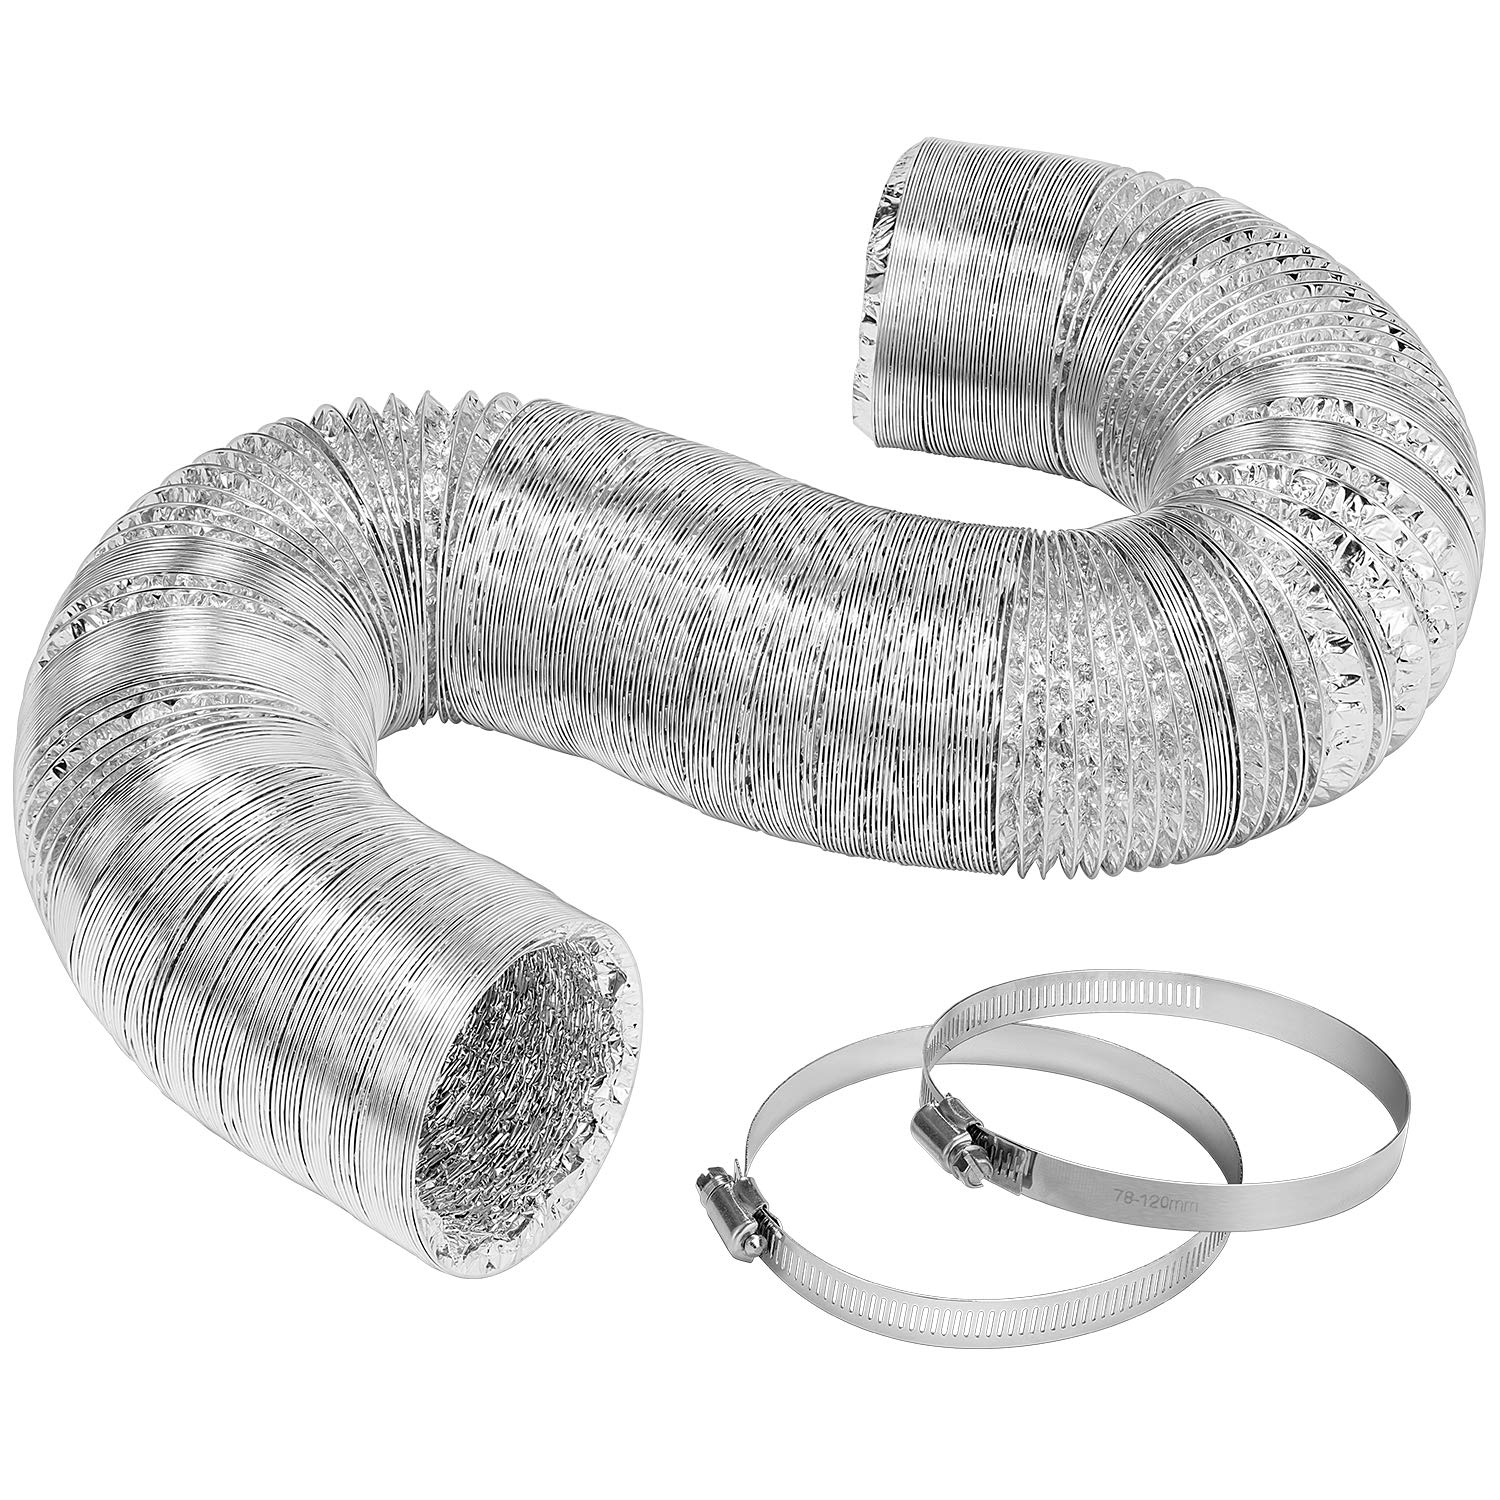 VIVOSUN 4-Inch 25-Ft. Non-Insulated Flexible Aluminum Air Ducting Dryer Vent Hose for HVAC Ventilation w/Two 4-Inch Stainless St